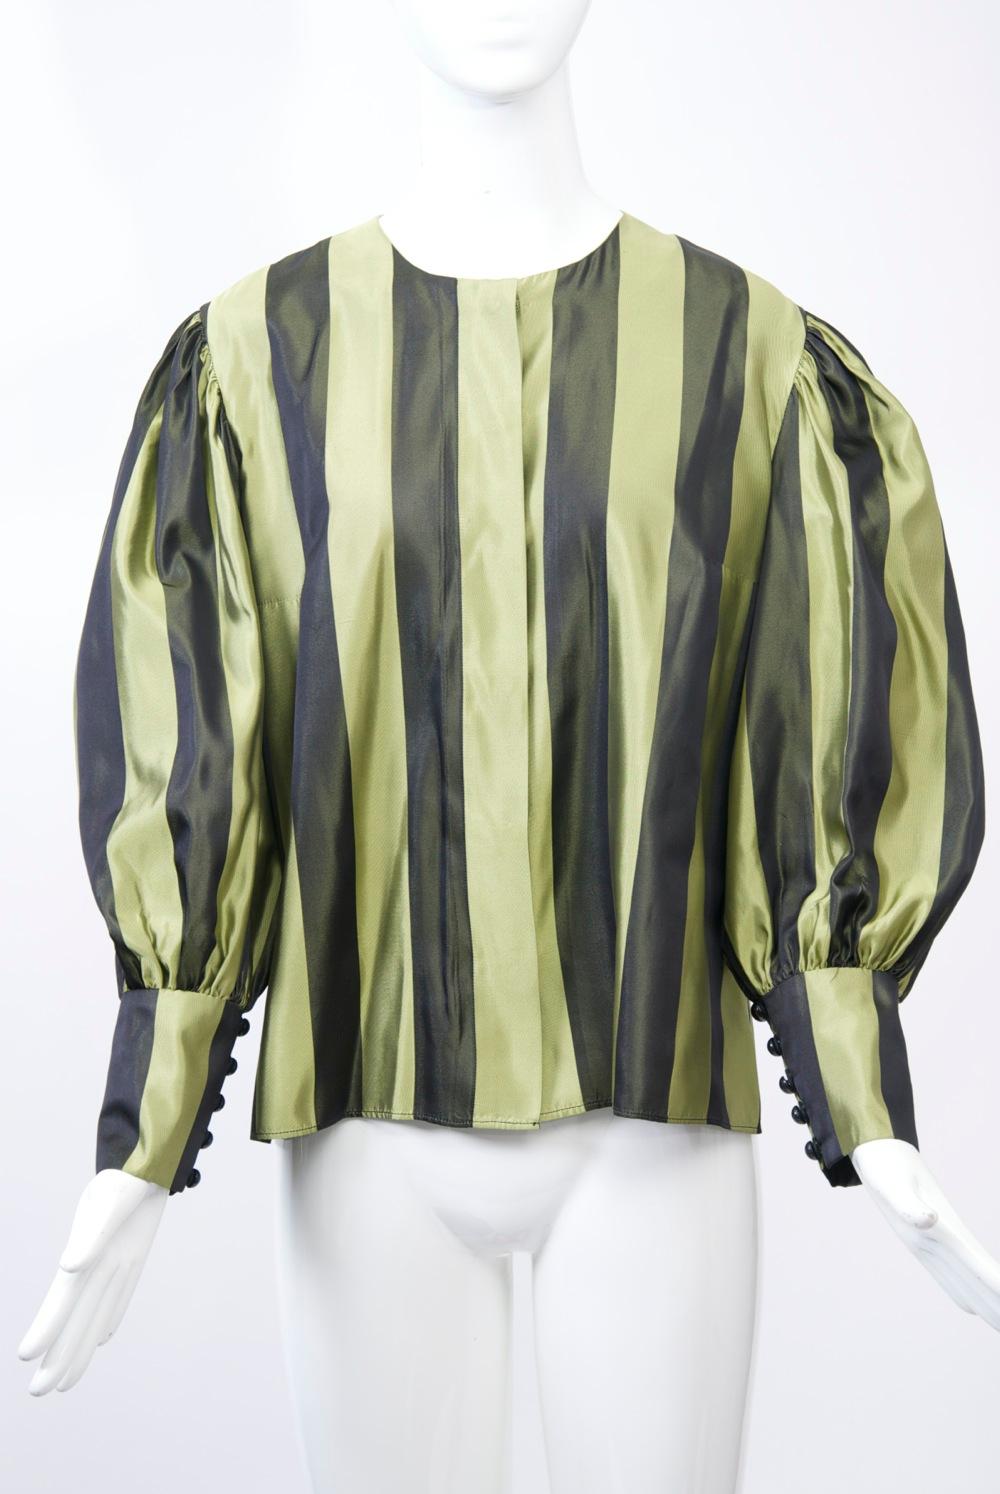 Blouse and shawl ensemble in pale olive and black striped silk, the collarless blouse featuring hidden buttons and juliet sleeves with deep buttoned wrists. The shawl, matching stripes on one sde, black velvet on the other, is long and deep. The